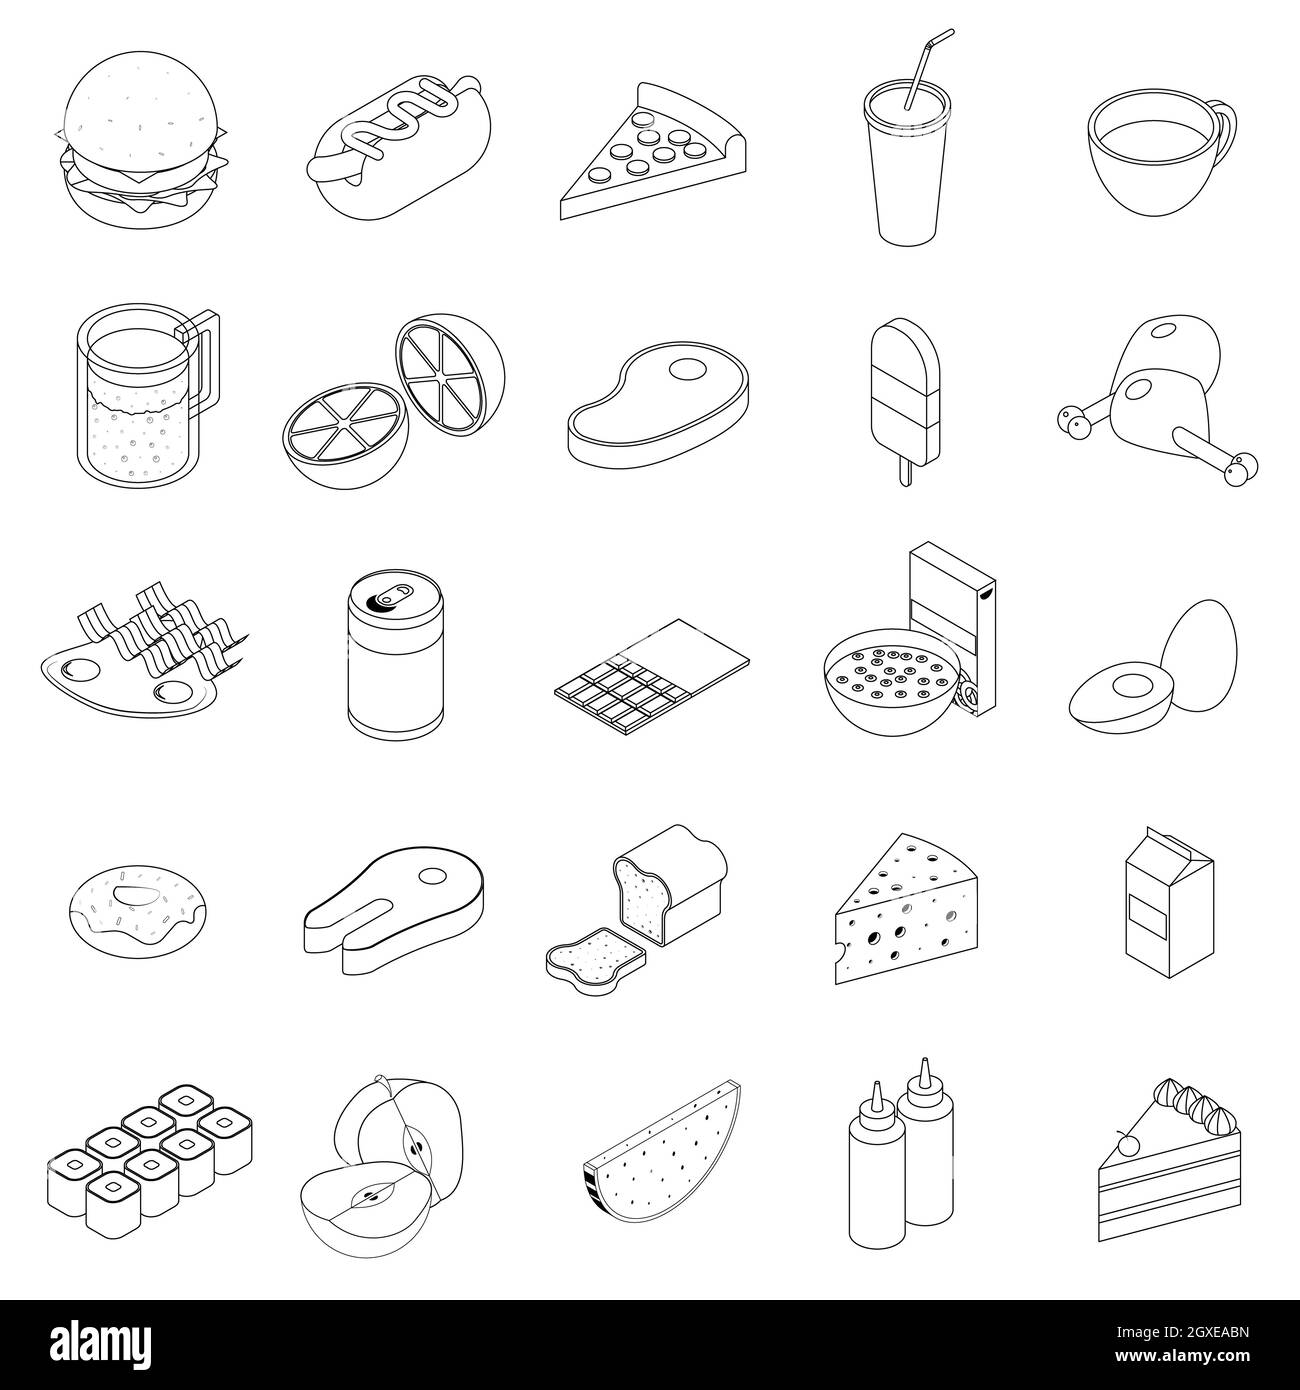 Food icons set in isometric 3d style on a white background Stock Photo